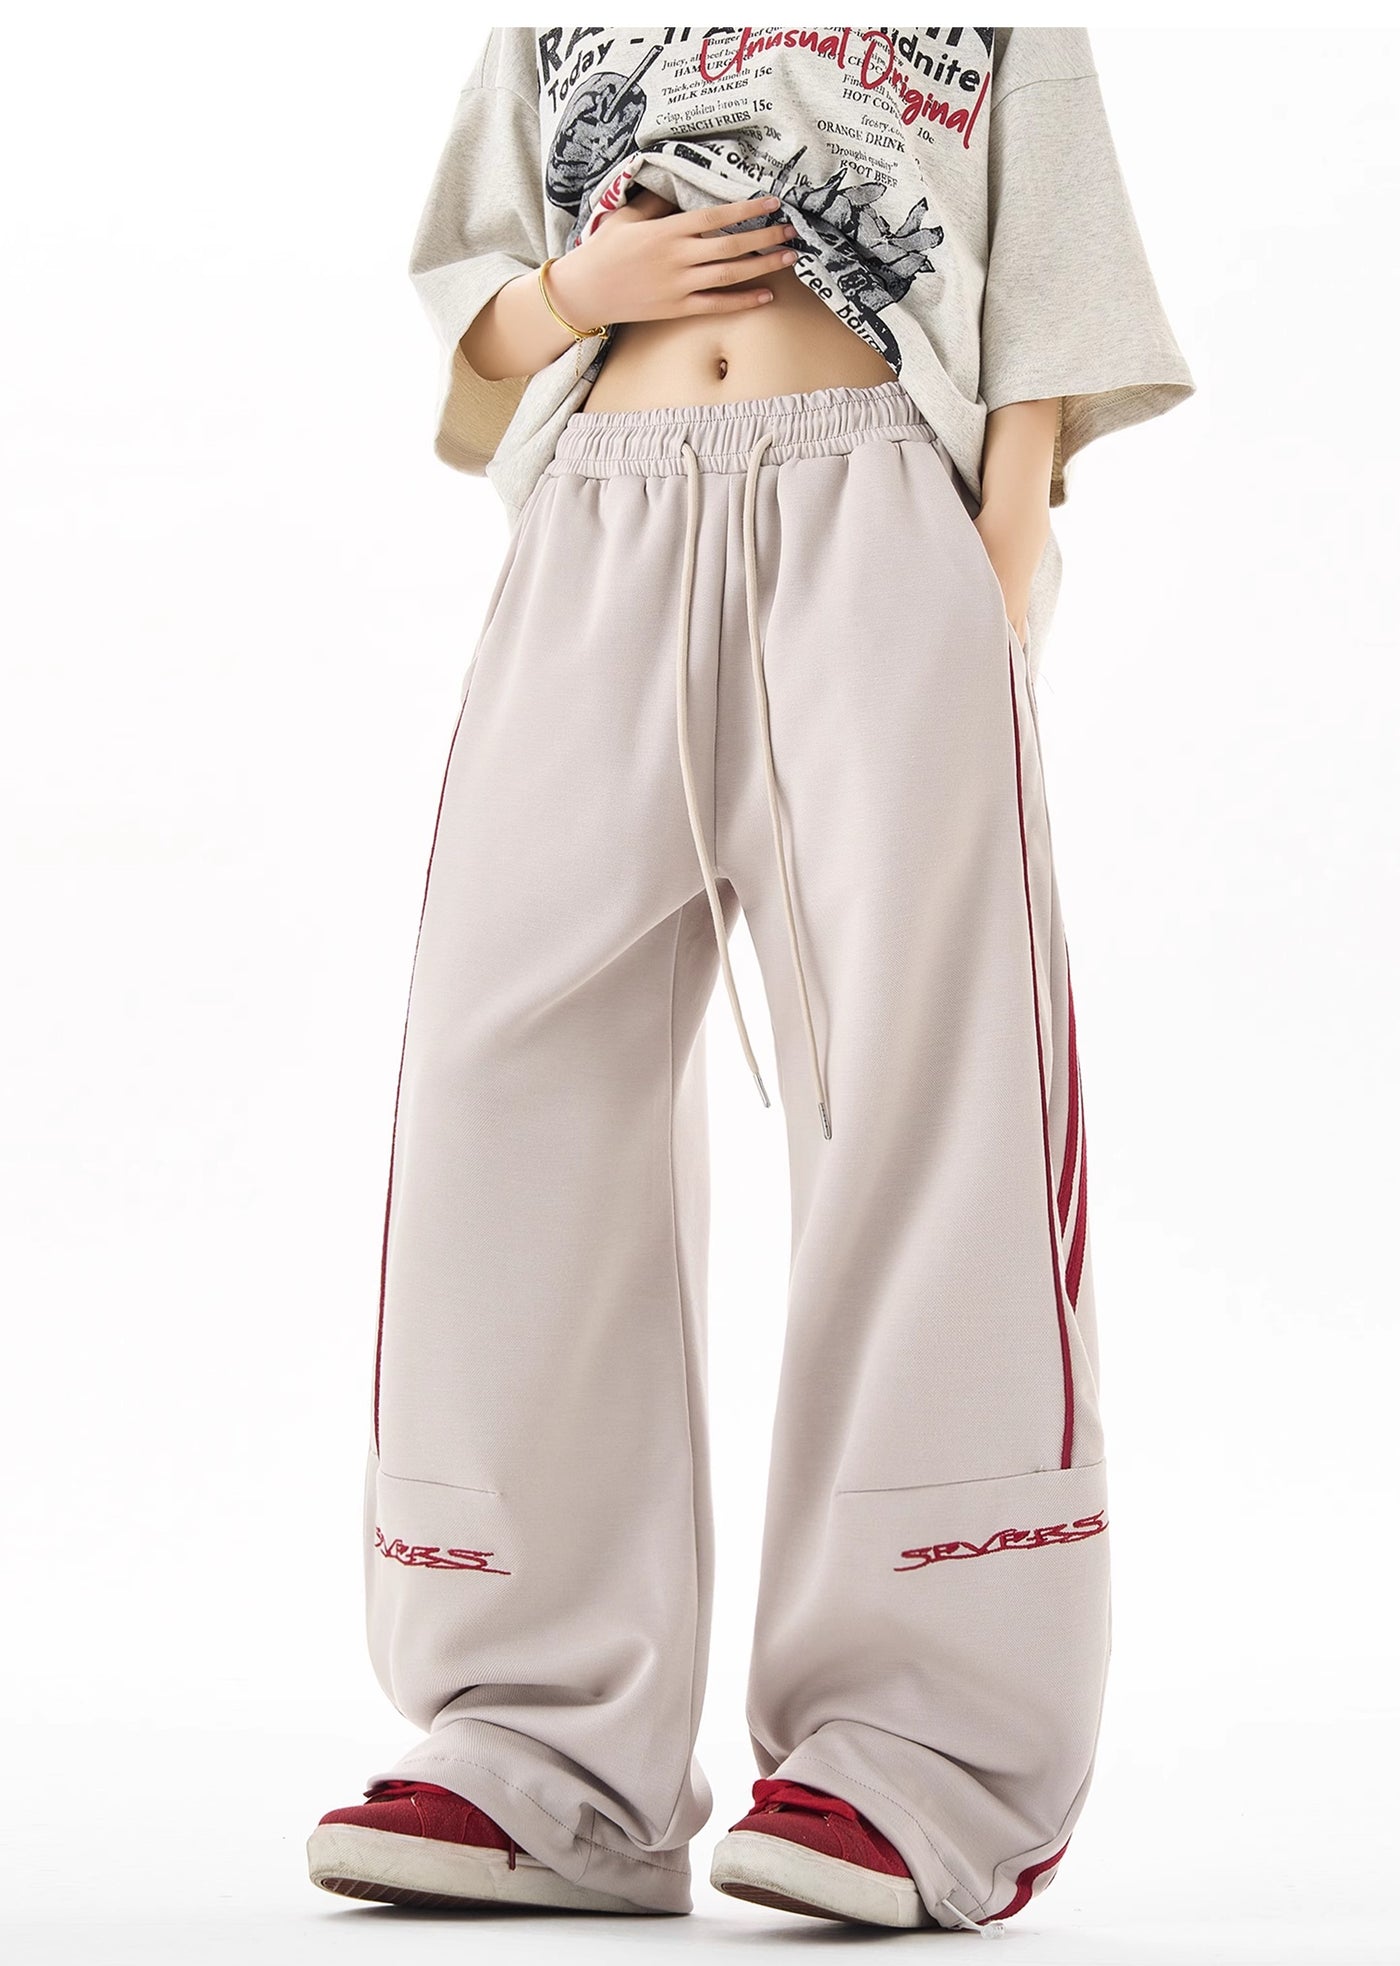 【H GANG X】Side three red color wide silhouette pants  HX0043